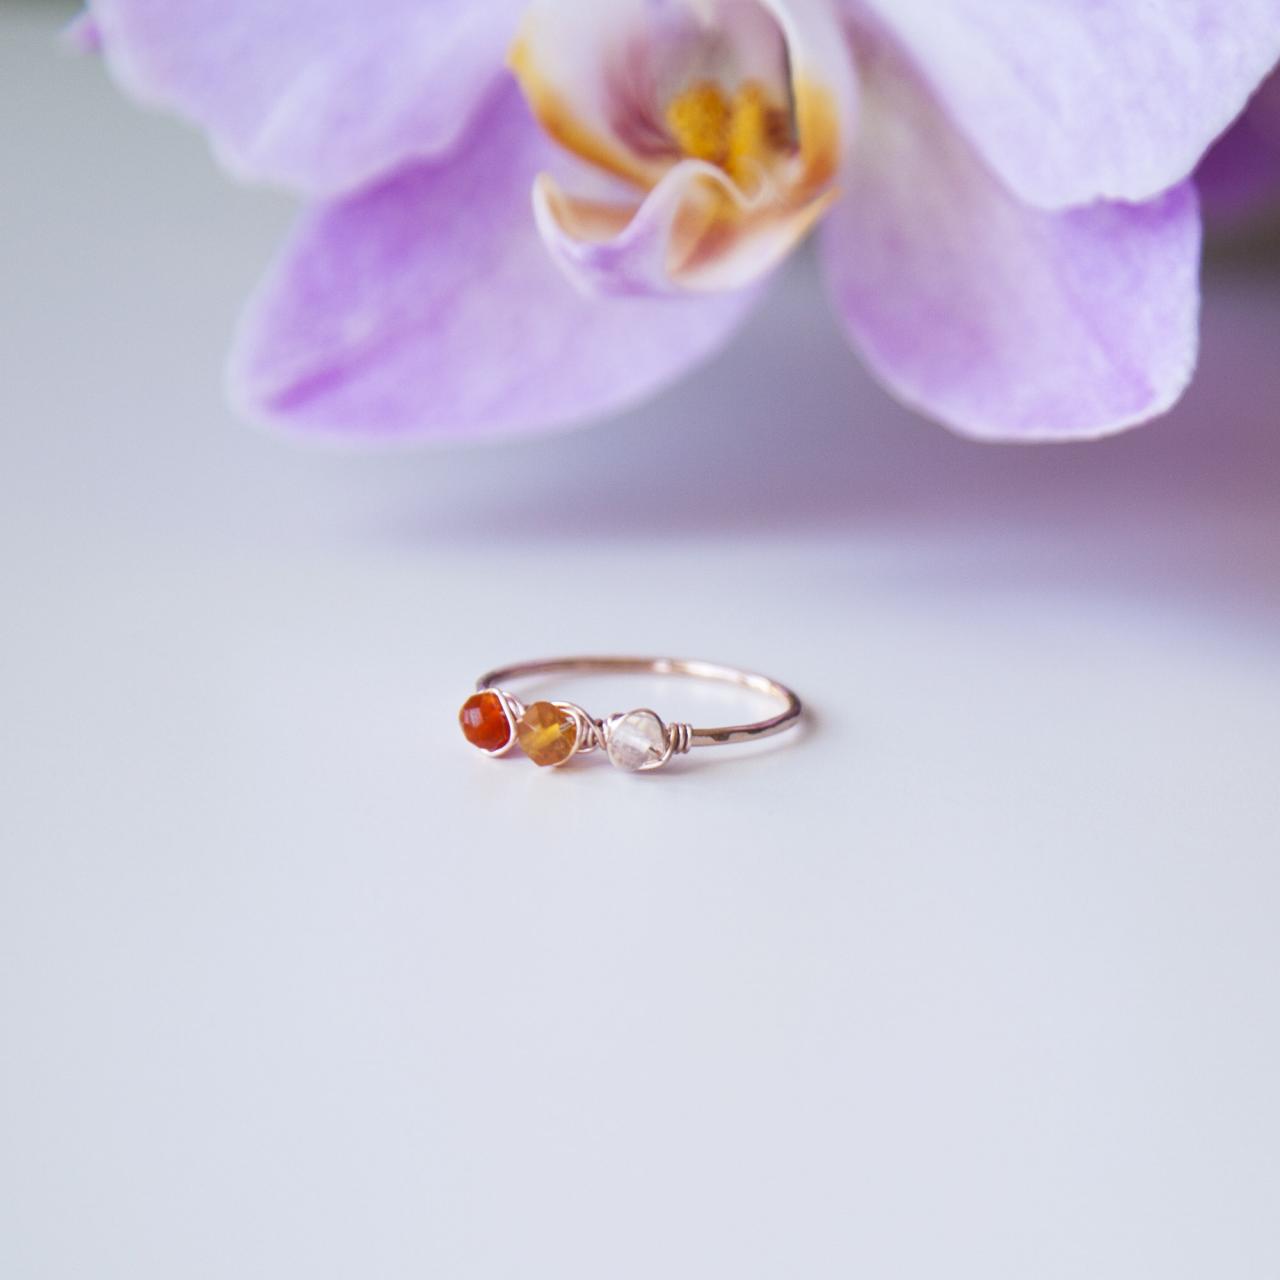 Triple Opal Rose Gold Ring, Natural Fire Opal Ring, Raw Opal Dainty Ring, Wire Wrapped Opal Ring, Faceted Ombre Opal Ring, Hammered Ring